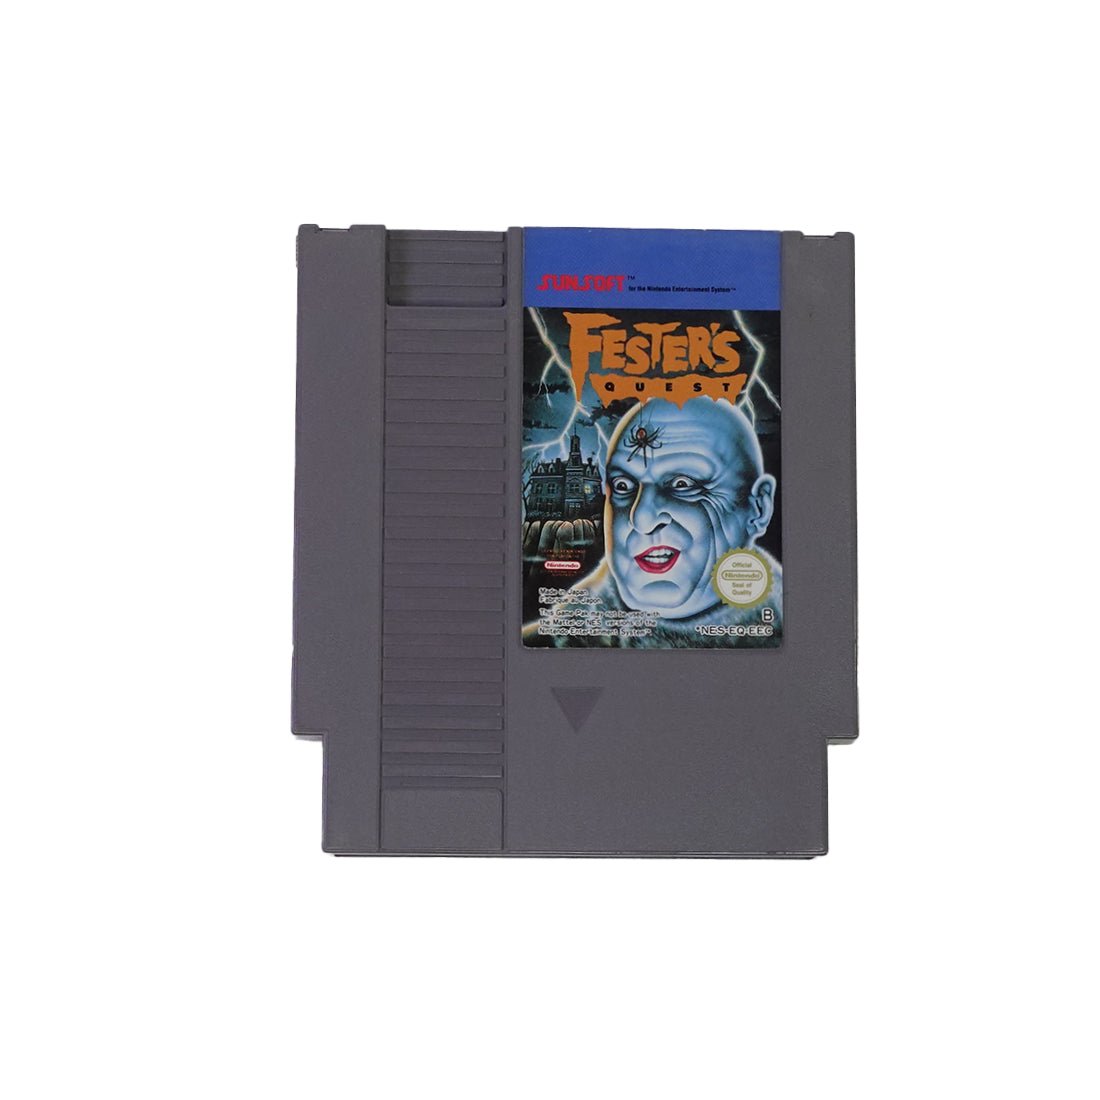 (Pre-Owned) Fester's Quest Game - NES - ريترو - Store 974 | ستور ٩٧٤